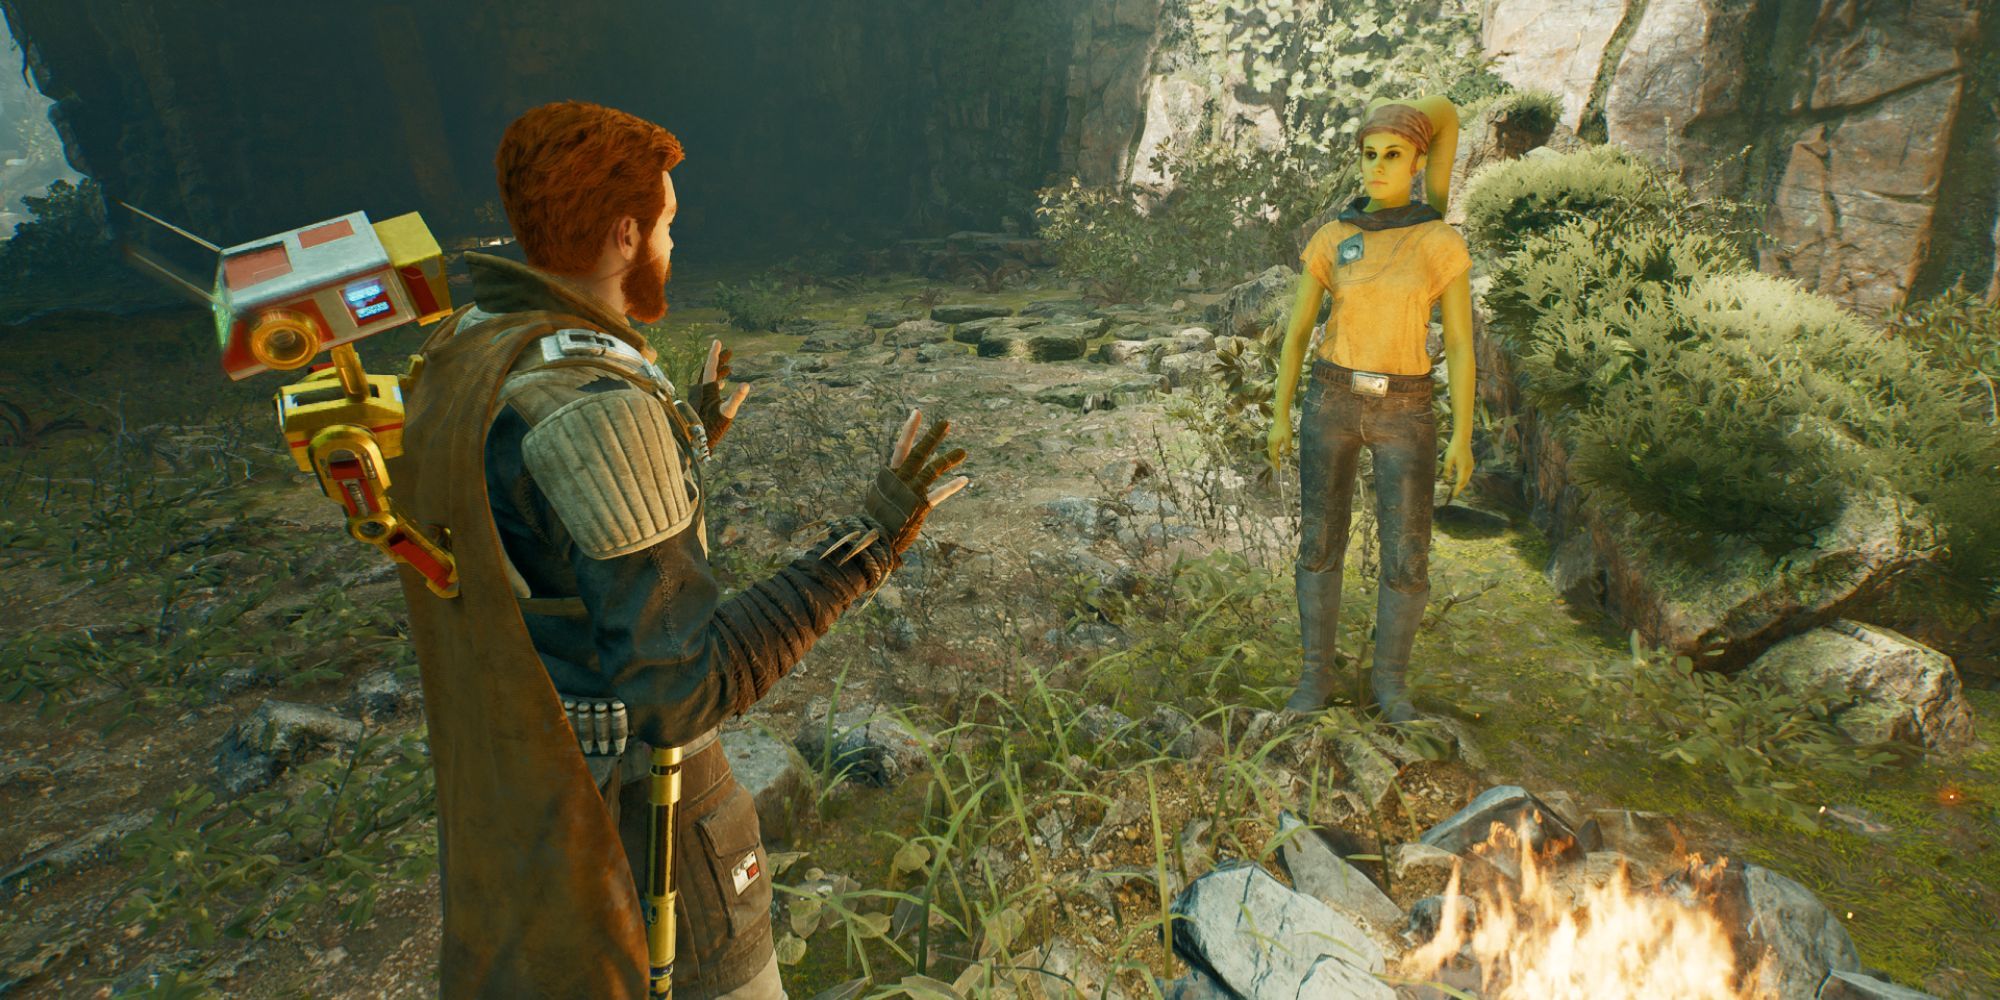 Cal speaks to Toa in the forest by a campfire, with BD-1 on his shoulder